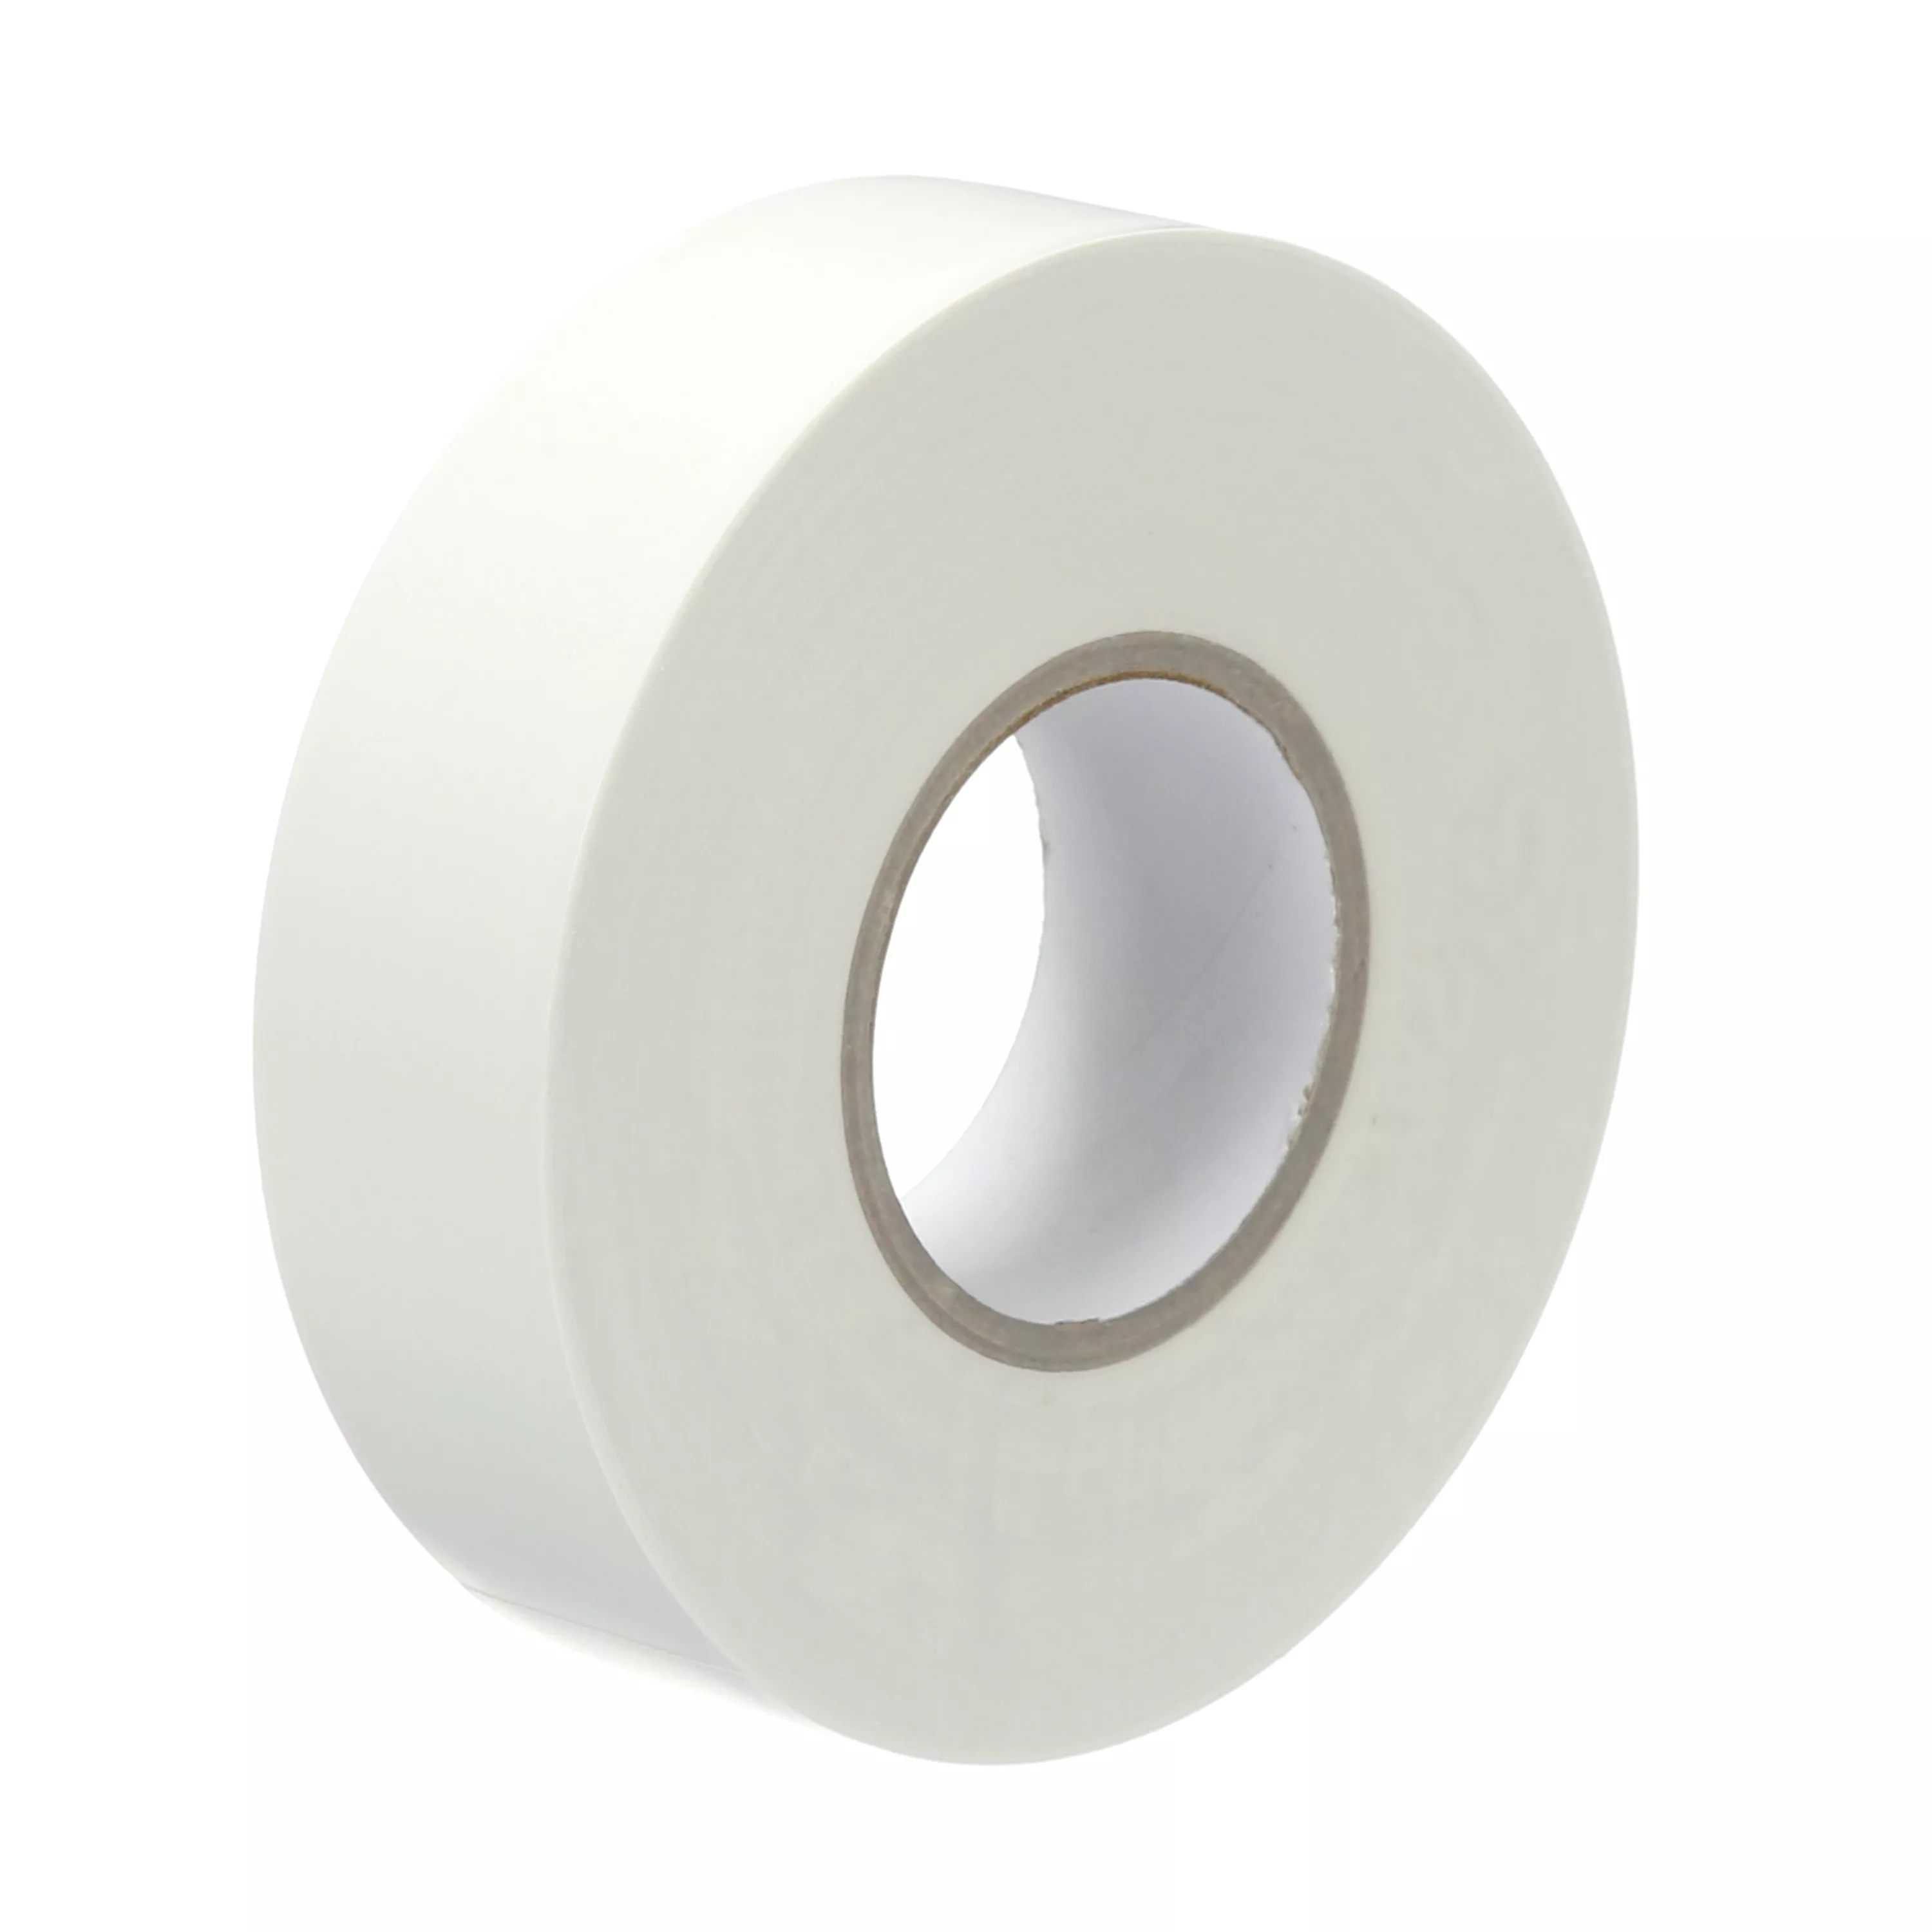 3M™ Selfwound PVC Tape 1506R, White , 1 in x 36 yd, 6 mil, 36 Rolls/Case